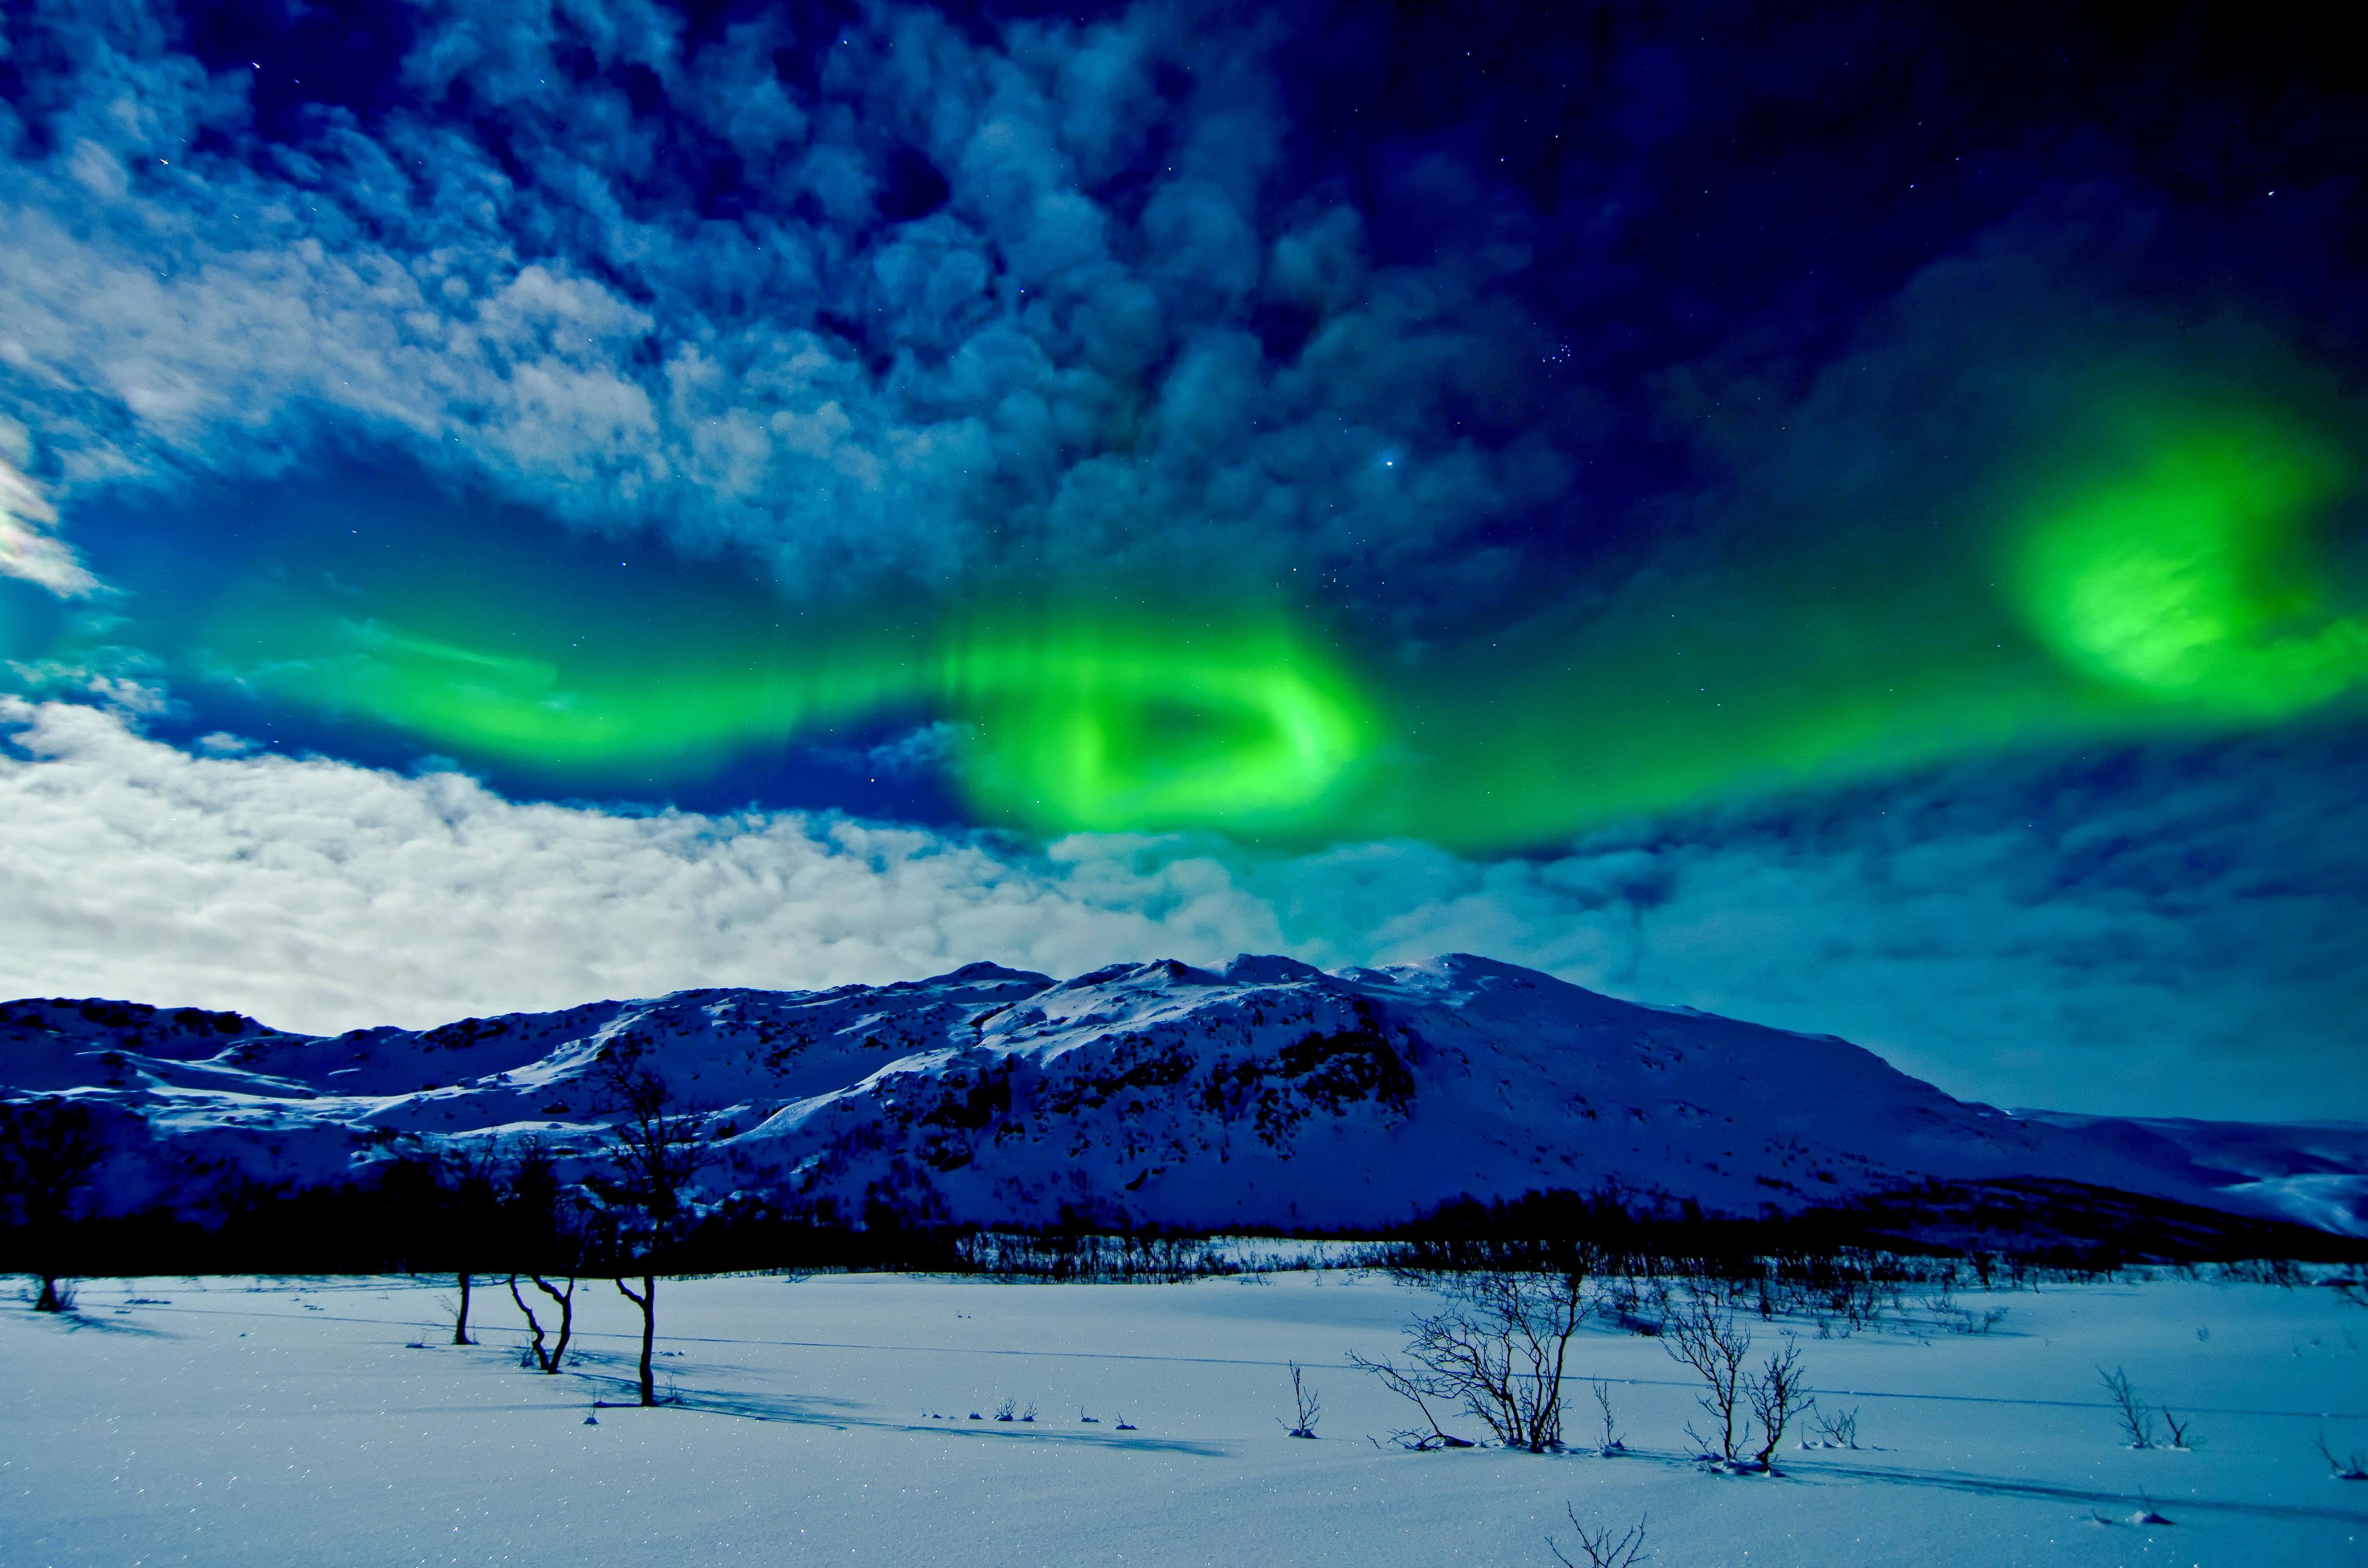 General 4634x3069 nature aurorae skyscape night winter nordic landscapes cold ice snow outdoors mountains snowy peak